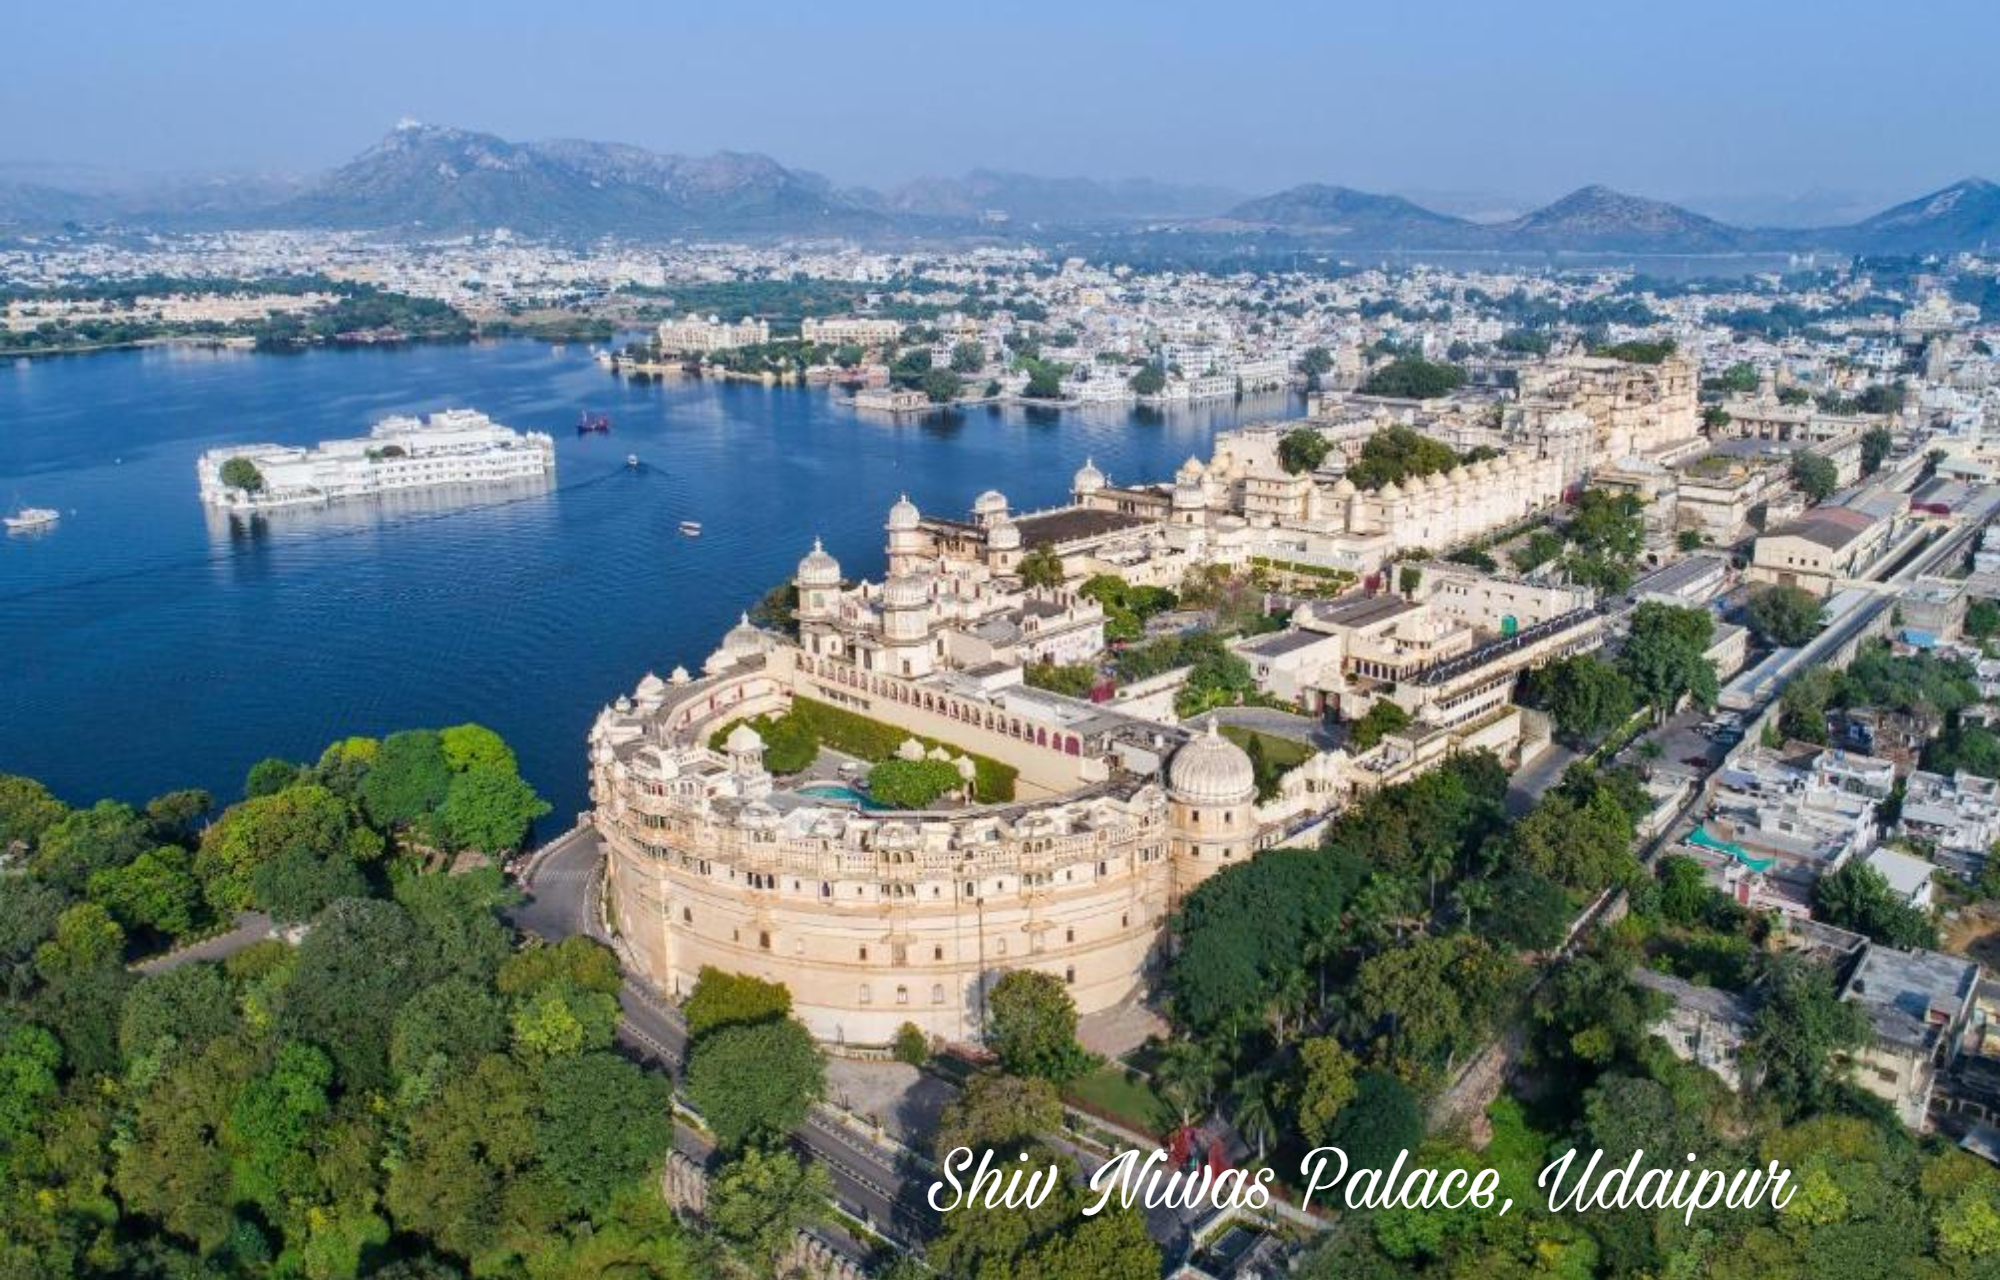 shiv niwas palace udaipur, top 10 hotels in udaipur, udaipur hotels, luxury hotels in udaipur,